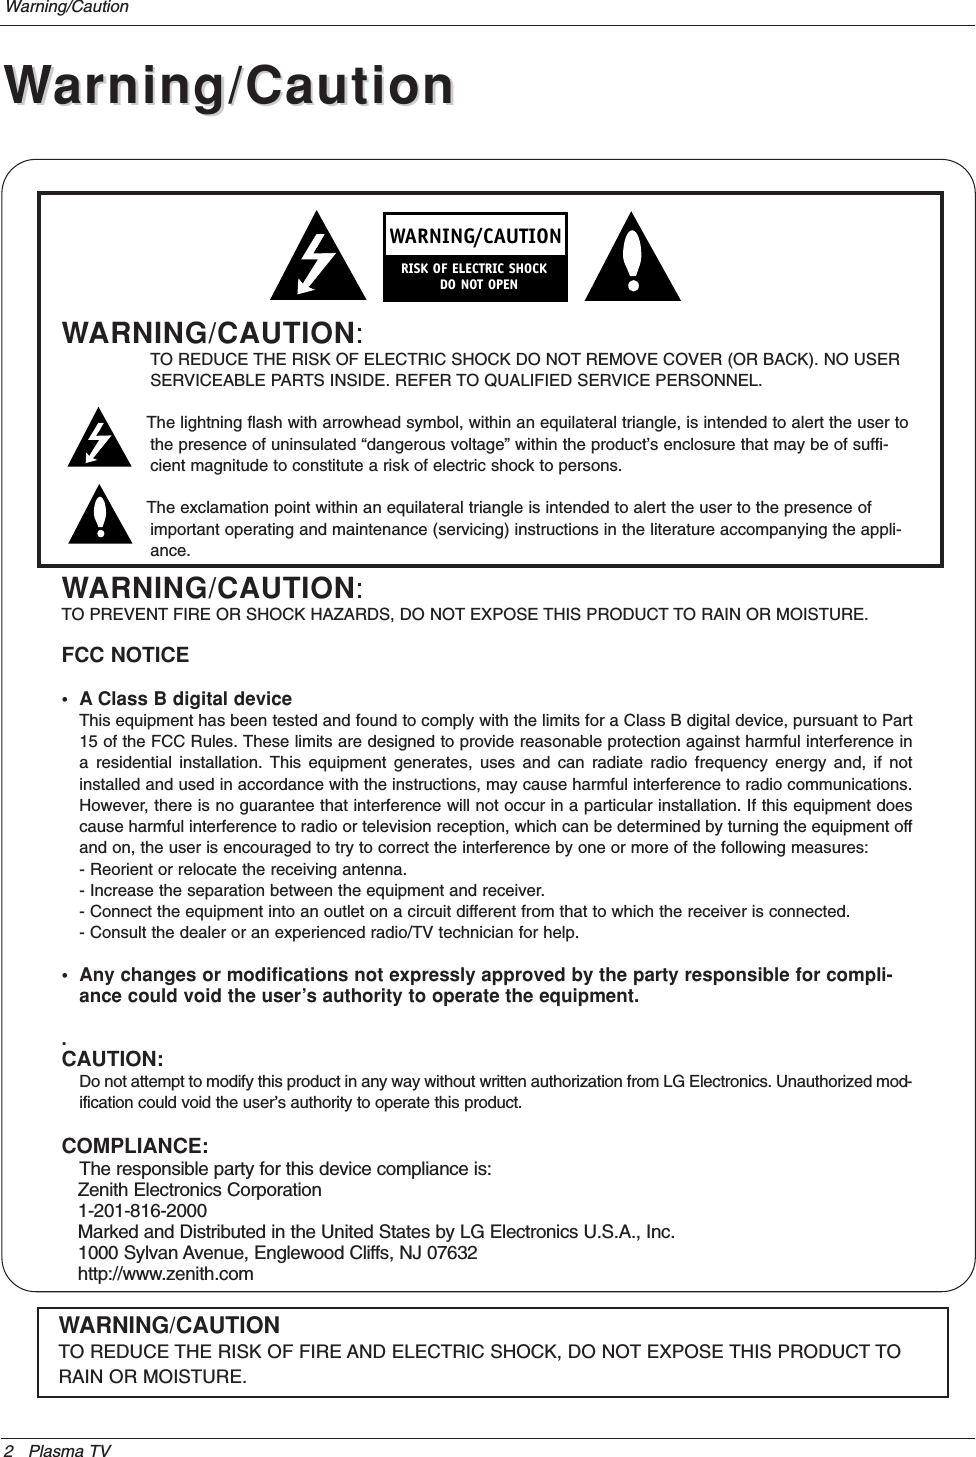 2 Plasma TVWarning/CautionWARNING/CAUTION:TO REDUCE THE RISK OF ELECTRIC SHOCK DO NOT REMOVE COVER (OR BACK). NO USERSERVICEABLE PARTS INSIDE. REFER TO QUALIFIED SERVICE PERSONNEL.The lightning flash with arrowhead symbol, within an equilateral triangle, is intended to alert the user tothe presence of uninsulated “dangerous voltage” within the product’s enclosure that may be of suffi-cient magnitude to constitute a risk of electric shock to persons.The exclamation point within an equilateral triangle is intended to alert the user to the presence ofimportant operating and maintenance (servicing) instructions in the literature accompanying the appli-ance.WARNING/CAUTION:TO PREVENT FIRE OR SHOCK HAZARDS, DO NOT EXPOSE THIS PRODUCT TO RAIN OR MOISTURE.FCC NOTICE• A Class B digital deviceThis equipment has been tested and found to comply with the limits for a Class B digital device, pursuant to Part15 of the FCC Rules. These limits are designed to provide reasonable protection against harmful interference ina residential installation. This equipment generates, uses and can radiate radio frequency energy and, if notinstalled and used in accordance with the instructions, may cause harmful interference to radio communications.However, there is no guarantee that interference will not occur in a particular installation. If this equipment doescause harmful interference to radio or television reception, which can be determined by turning the equipment offand on, the user is encouraged to try to correct the interference by one or more of the following measures:- Reorient or relocate the receiving antenna.- Increase the separation between the equipment and receiver.- Connect the equipment into an outlet on a circuit different from that to which the receiver is connected.- Consult the dealer or an experienced radio/TV technician for help.• Any changes or modifications not expressly approved by the party responsible for compli-ance could void the user’s authority to operate the equipment..CAUTION:Do not attempt to modify this product in any way without written authorization from LG Electronics. Unauthorized mod-ification could void the user’s authority to operate this product.COMPLIANCE:The responsible party for this device compliance is:Zenith Electronics Corporation1-201-816-2000Marked and Distributed in the United States by LG Electronics U.S.A., Inc.1000 Sylvan Avenue, Englewood Cliffs, NJ 07632http://www.zenith.comWARNINGRISK OF ELECTRIC SHOCK        DO NOT OPEN/CAUTIONWARNING/CAUTIONTO REDUCE THE RISK OF FIRE AND ELECTRIC SHOCK, DO NOT EXPOSE THIS PRODUCT TORAIN OR MOISTURE.WWarning/Cautionarning/Caution